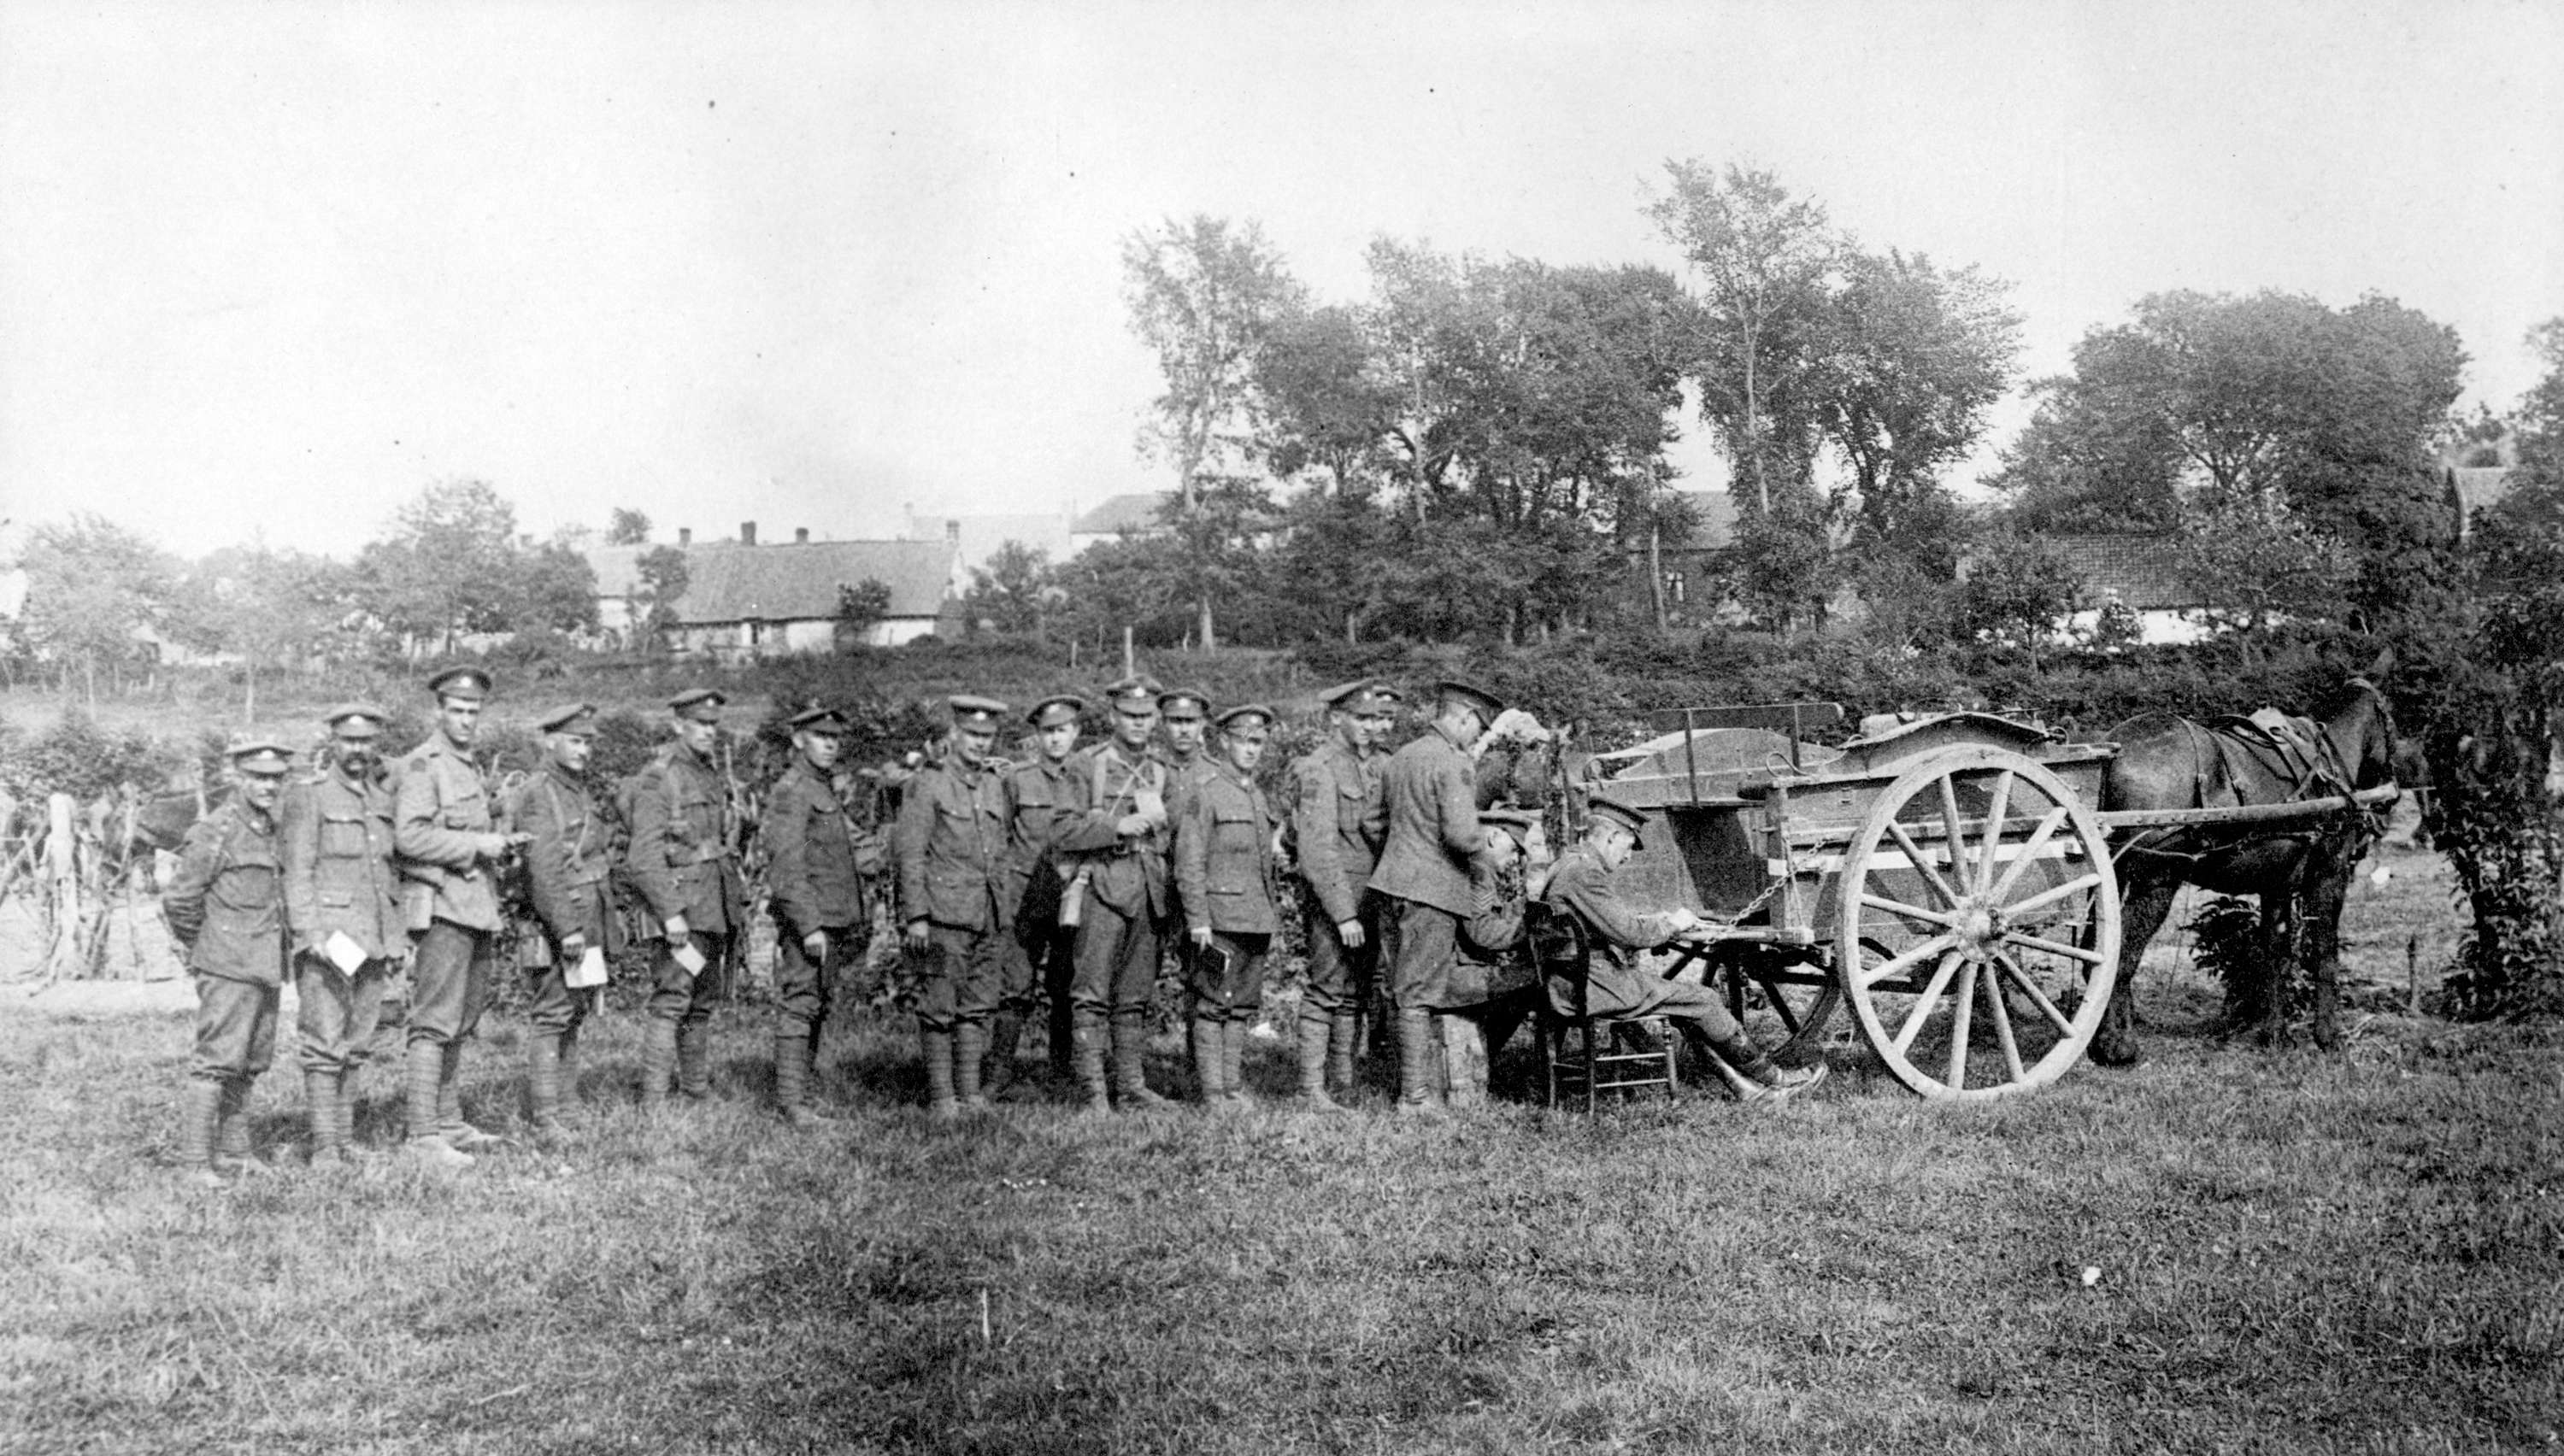 Men of the 7th Battalion C.E.F. lined up to receive pay on the battlefield from paymaster Major P.M. Ferris.jpg